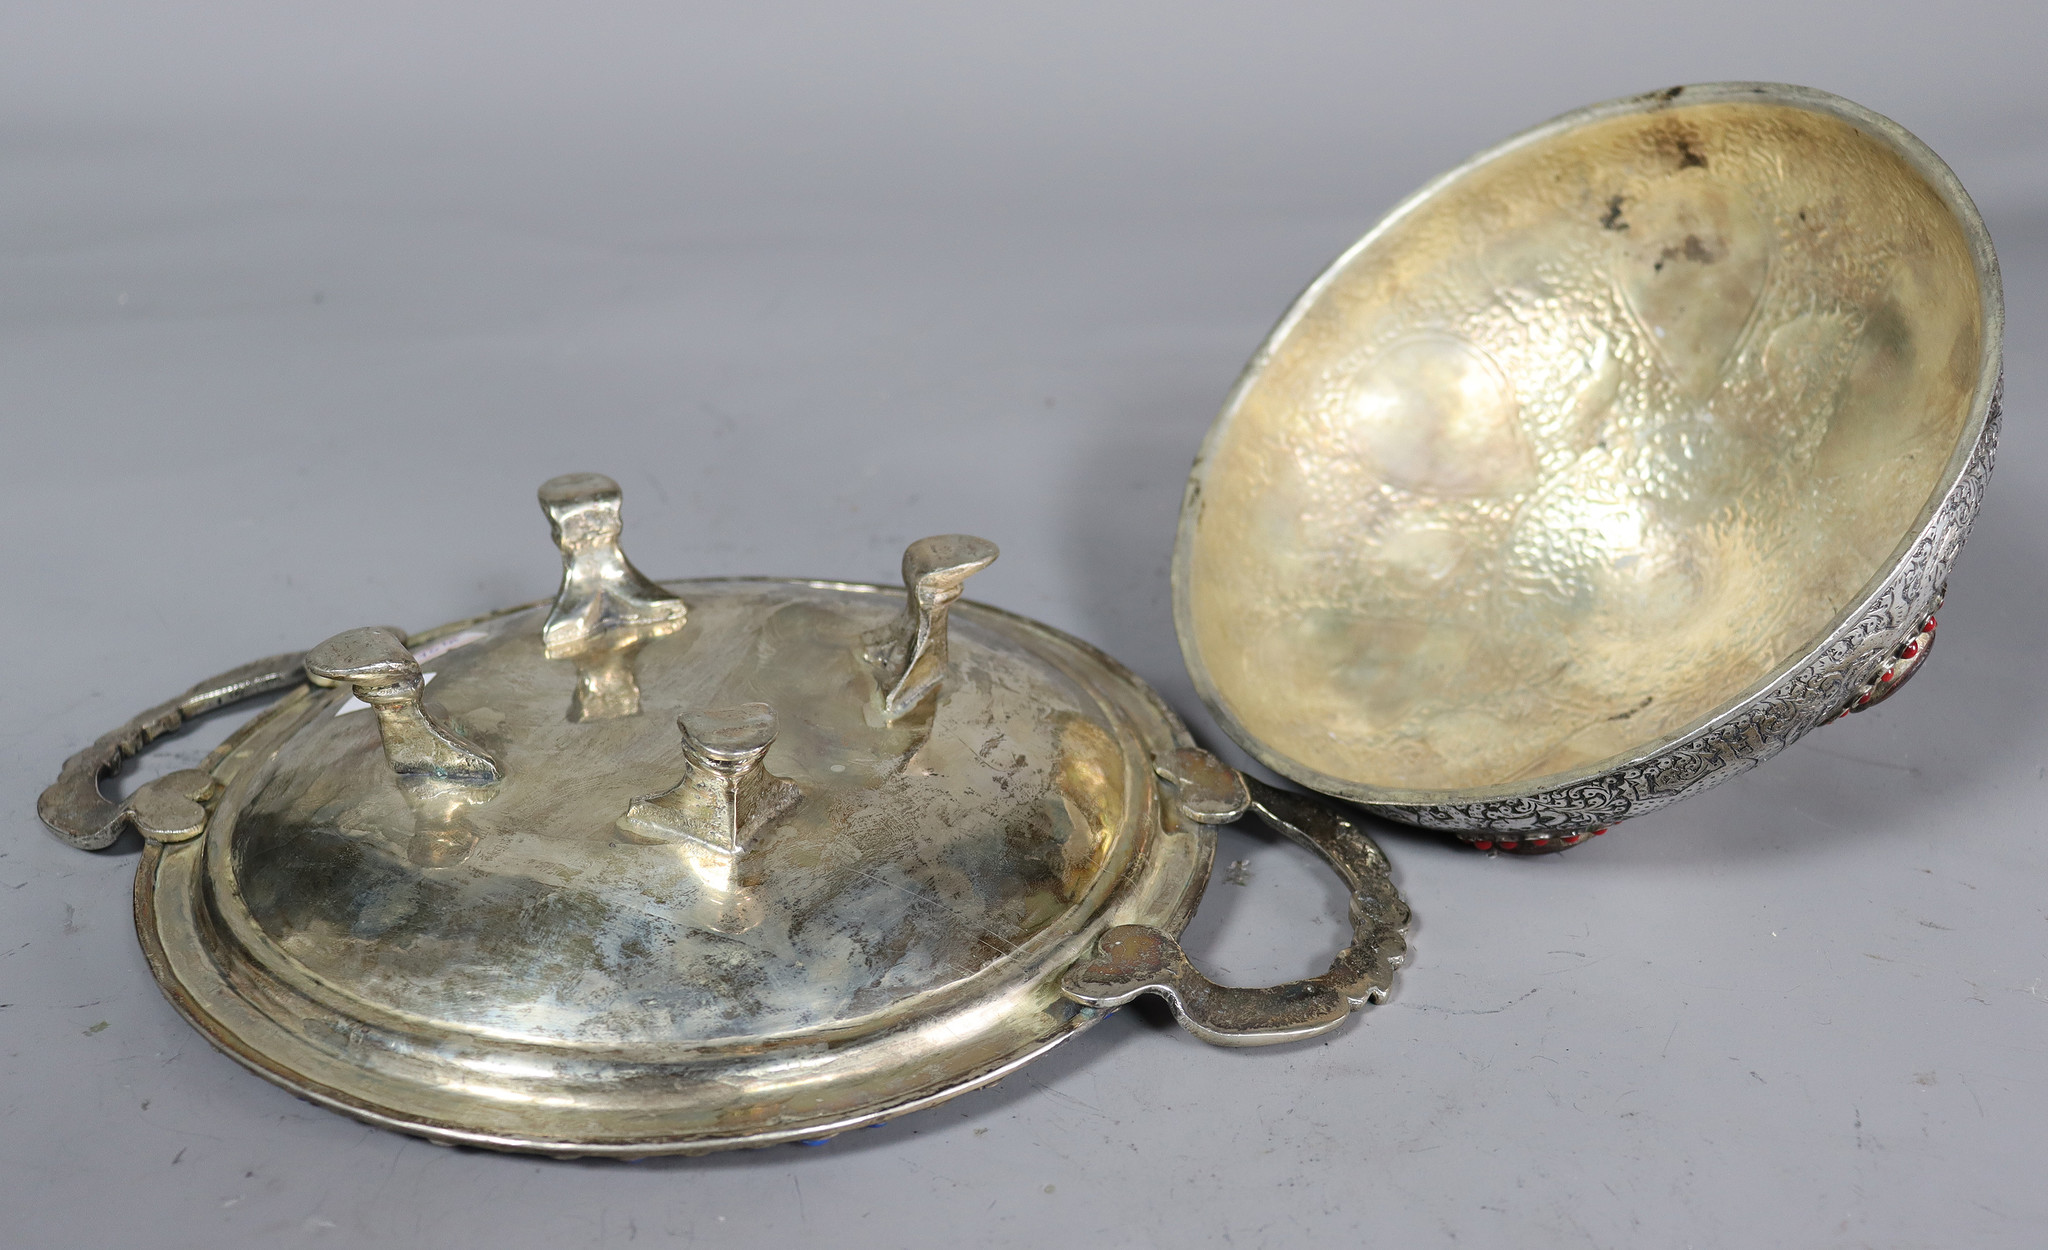 Extravagant handmade  oriental nickel silver entree dishes Bowl Tureen With Lid And Handles from Afghanistan No:K